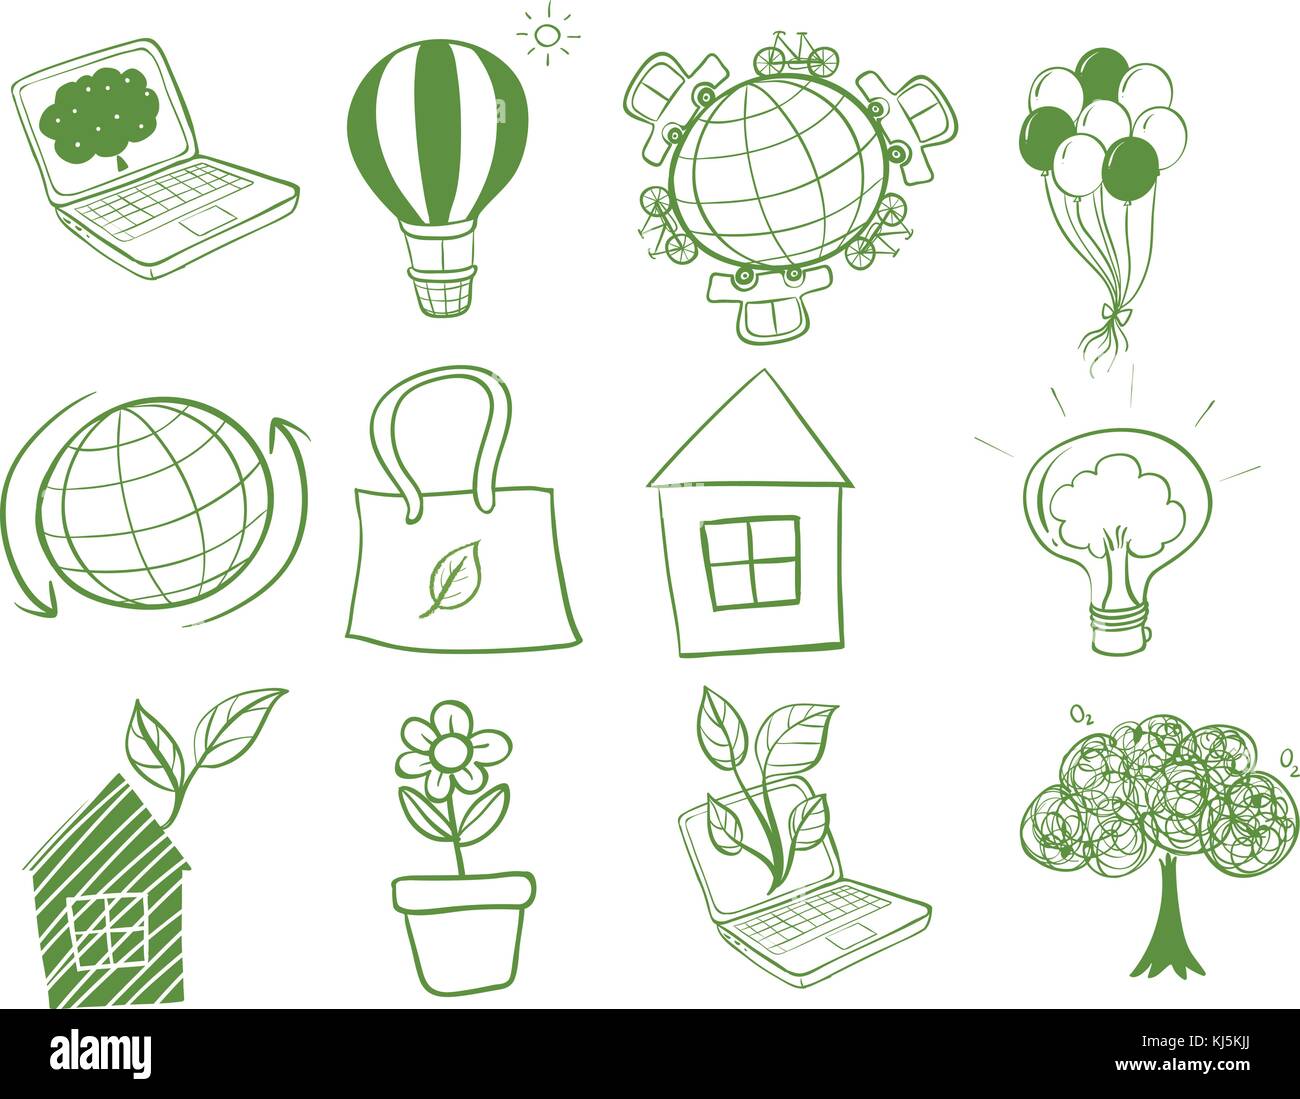 Illustration of the things around the environment on a white background Stock Vector